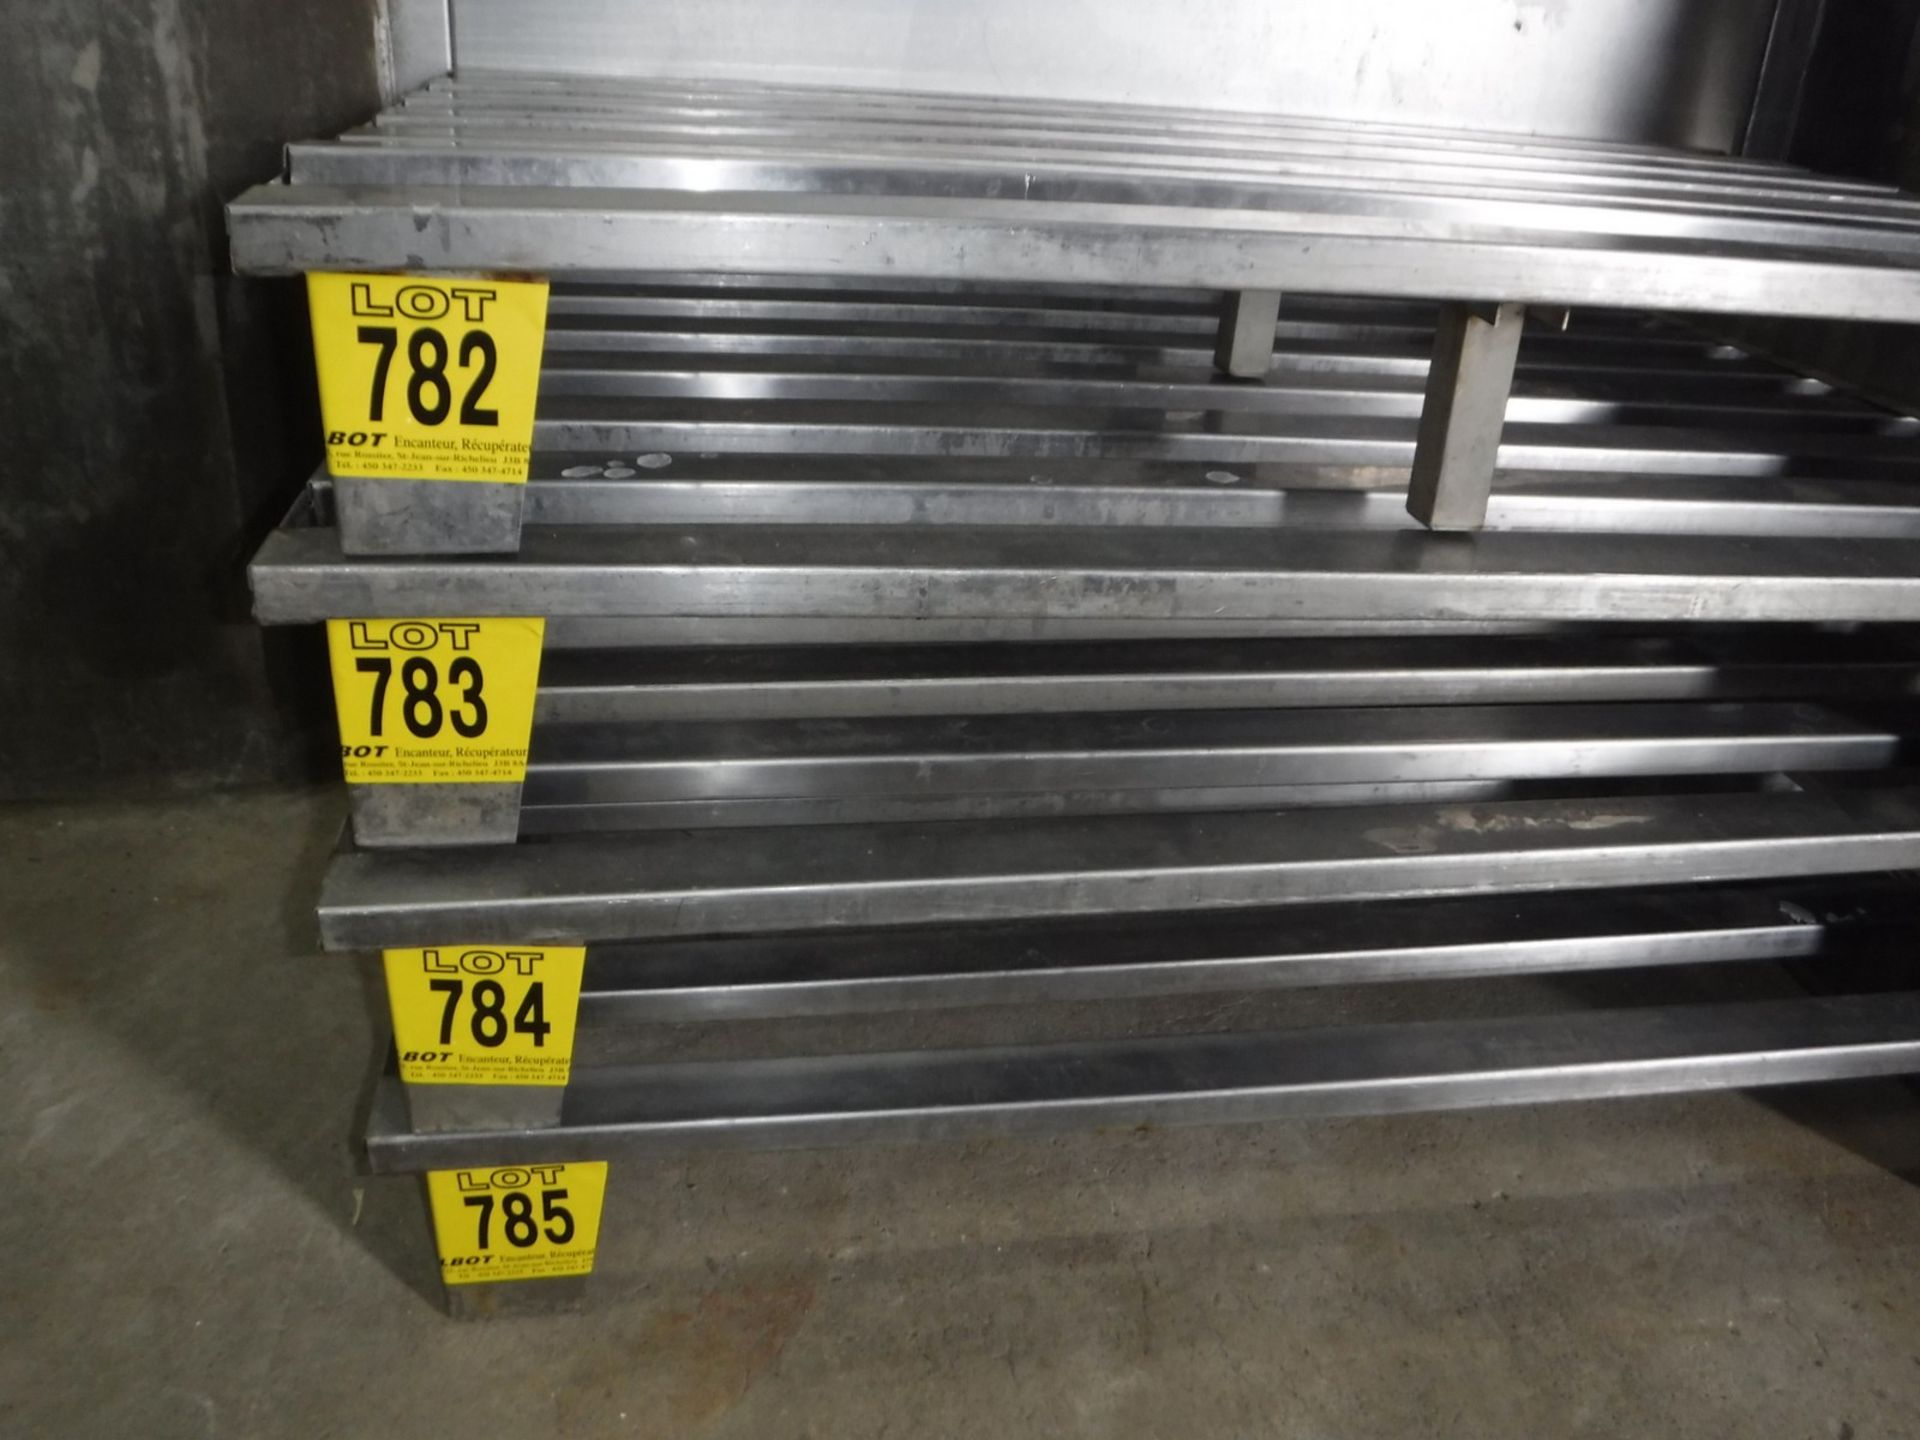 STAINLESS HANDLING PALLET 30 "X 45"